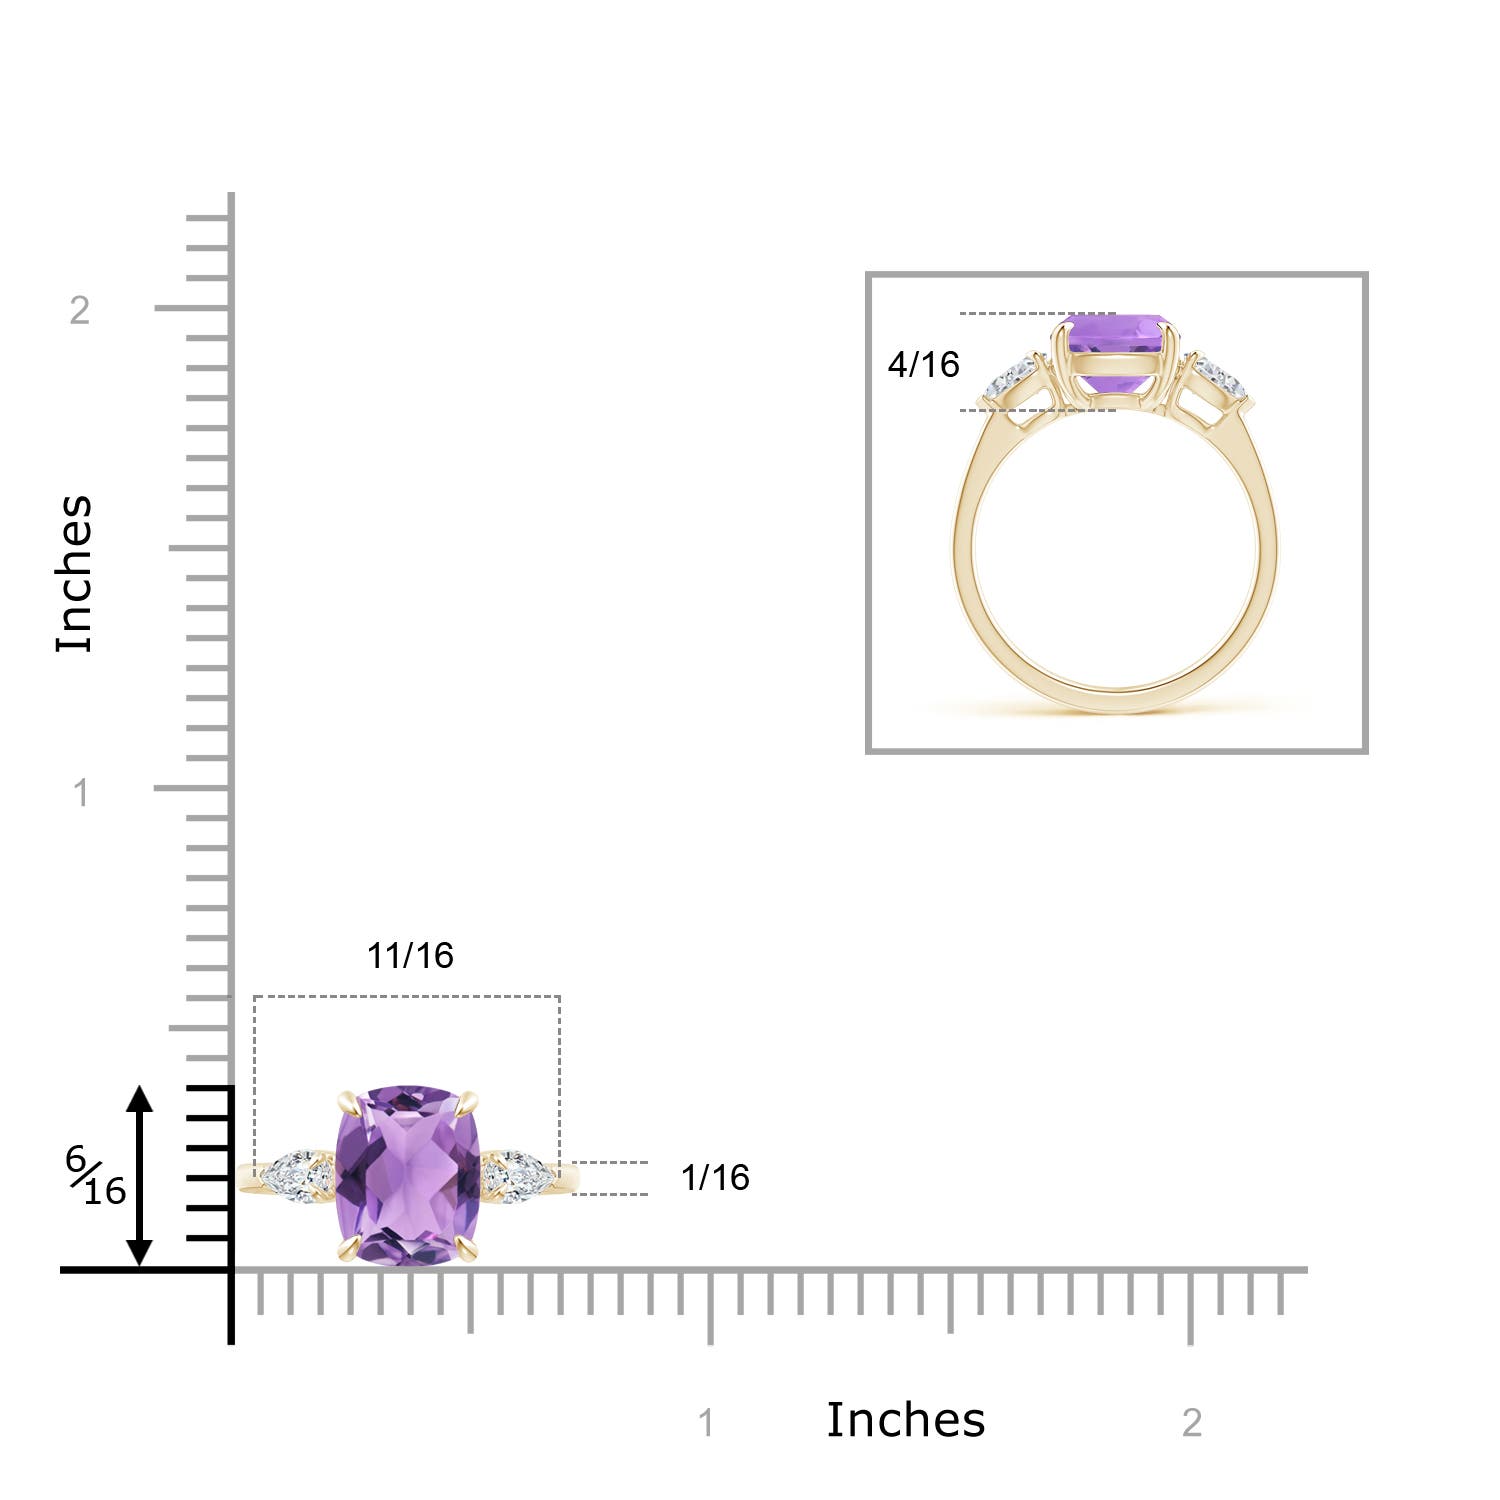 A - Amethyst / 3.1 CT / 14 KT Yellow Gold